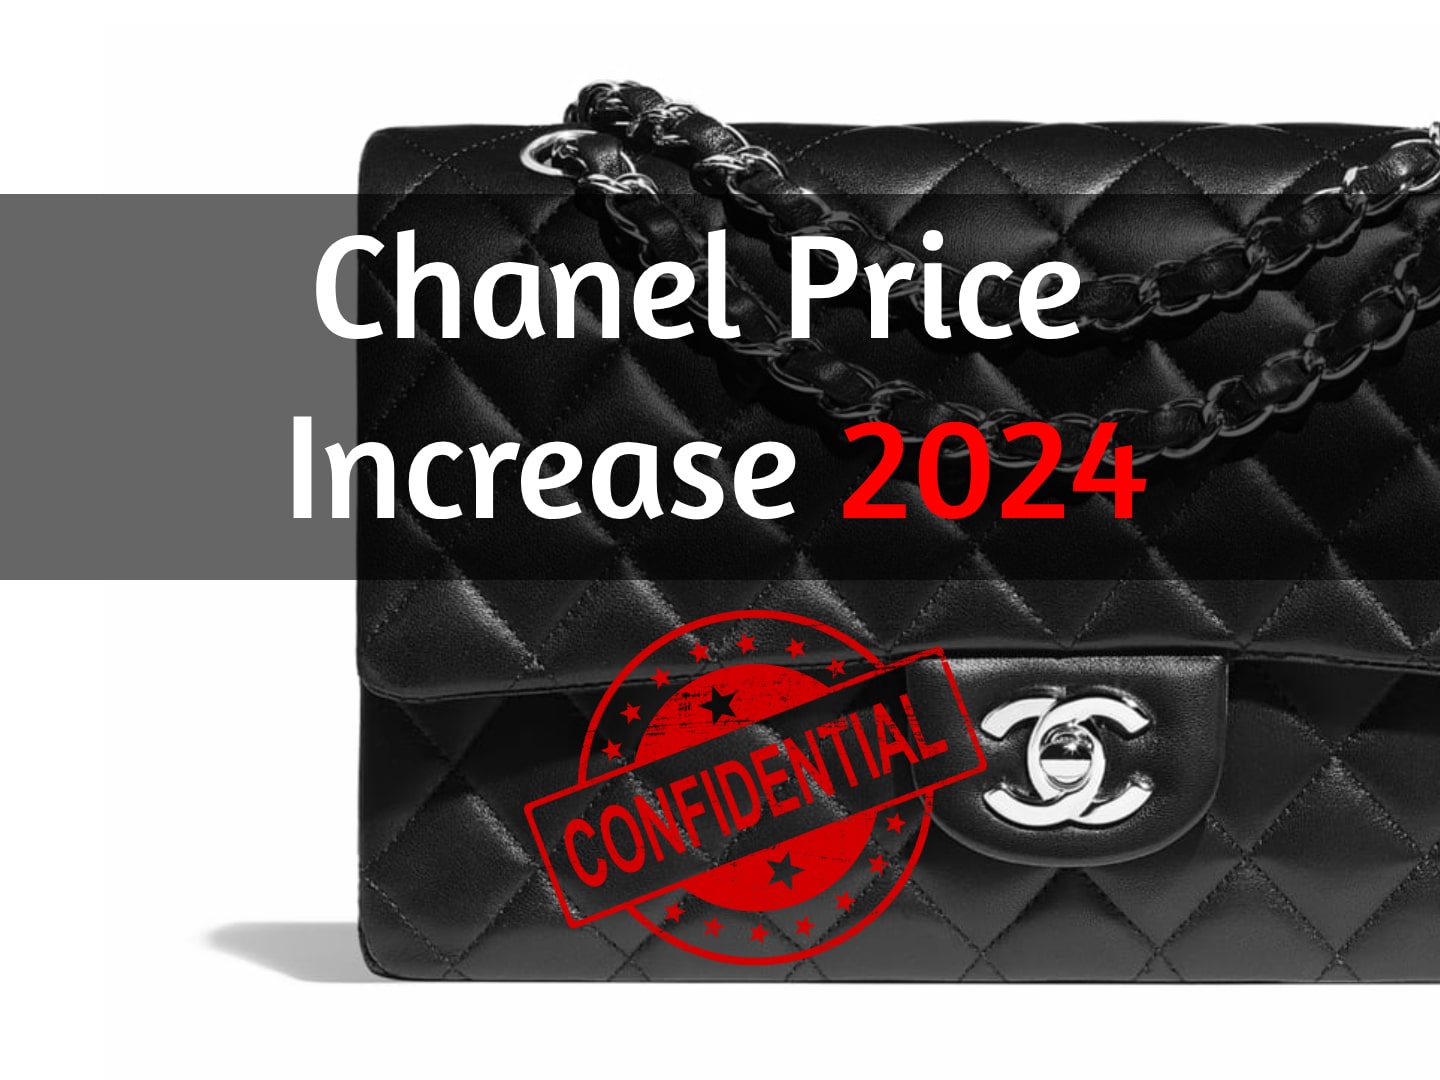 Chanel Price Increase in 2024 and History